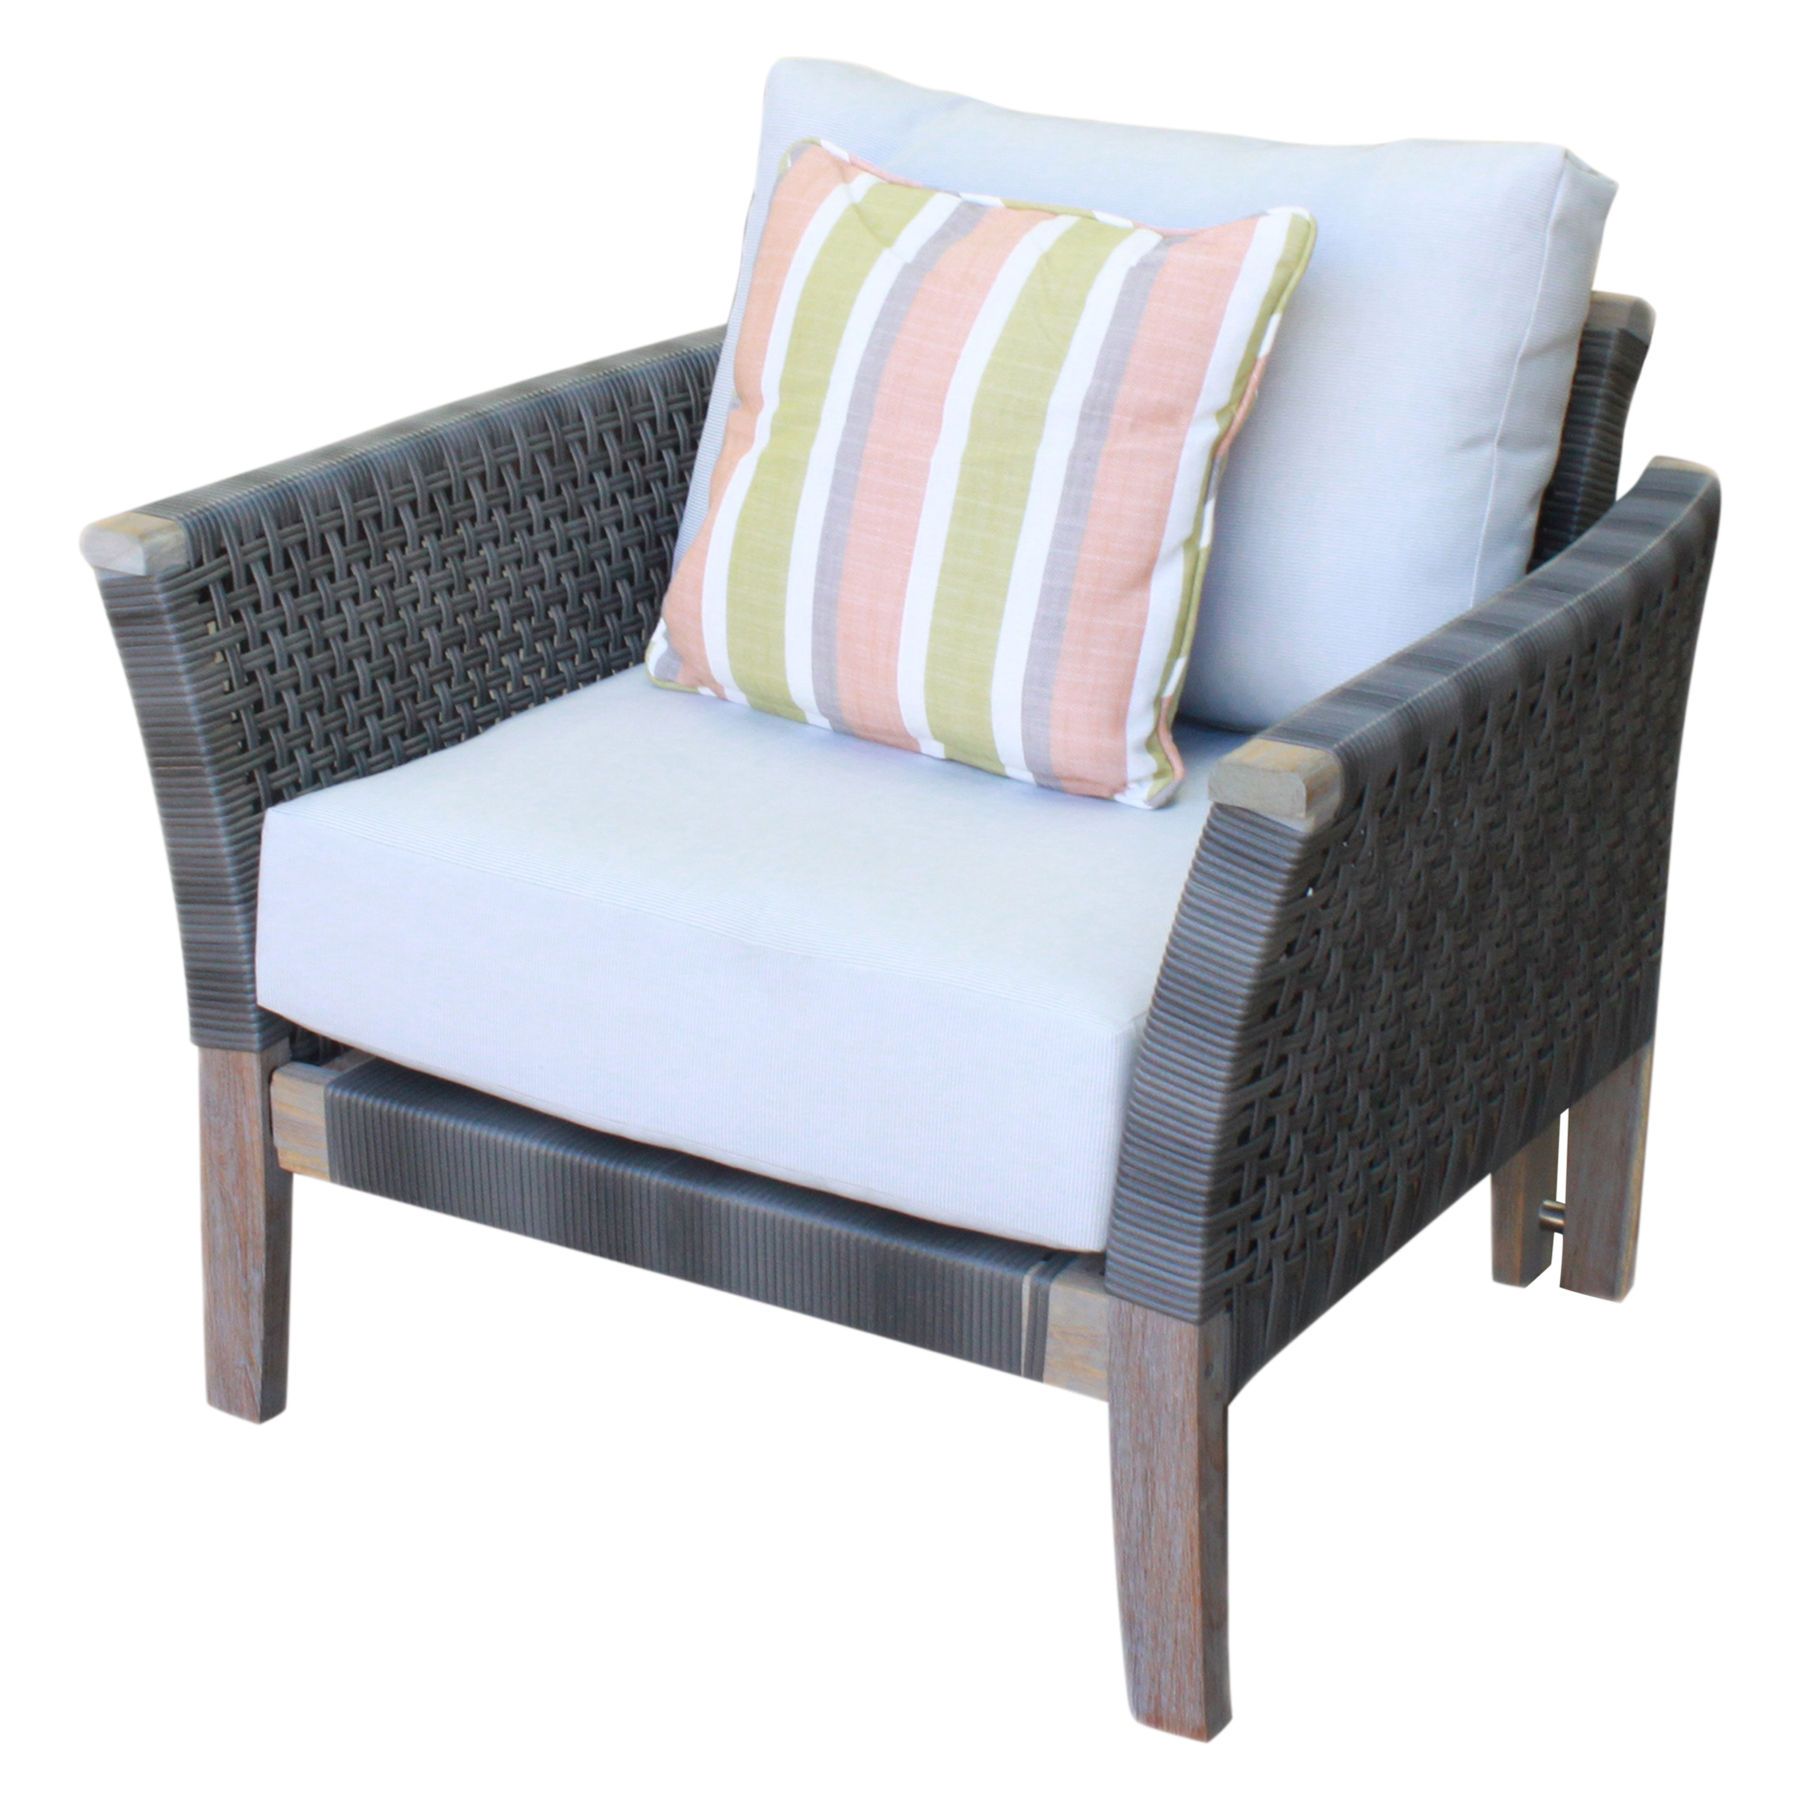 Outdoor Armchairs Intended For Favorite Paradise Outdoor Armchairqfurniture (View 5 of 15)